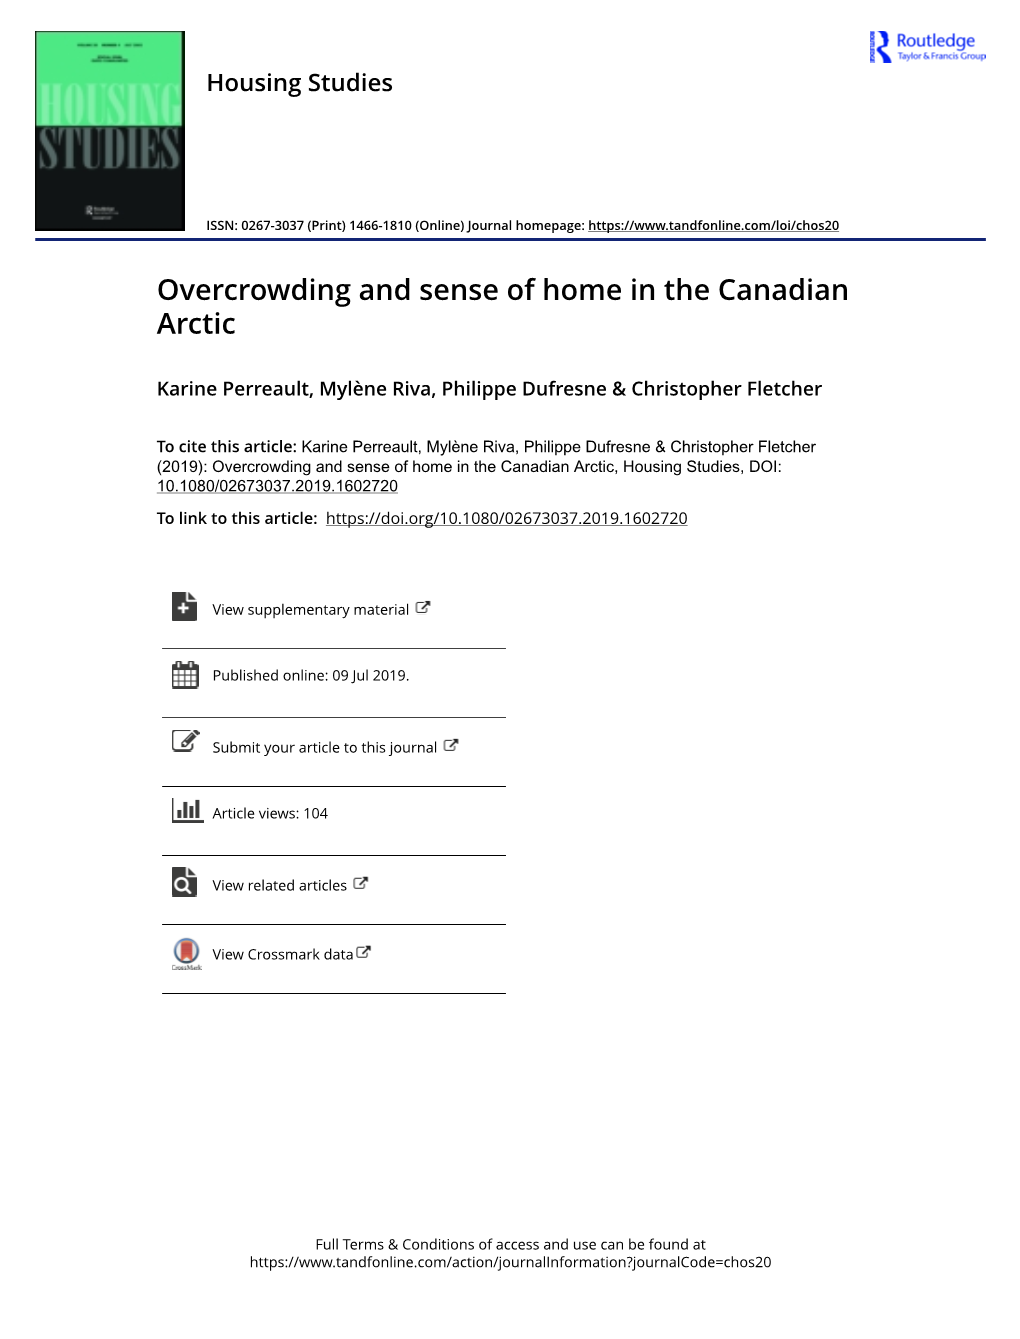 Overcrowding and Sense of Home in the Canadian Arctic